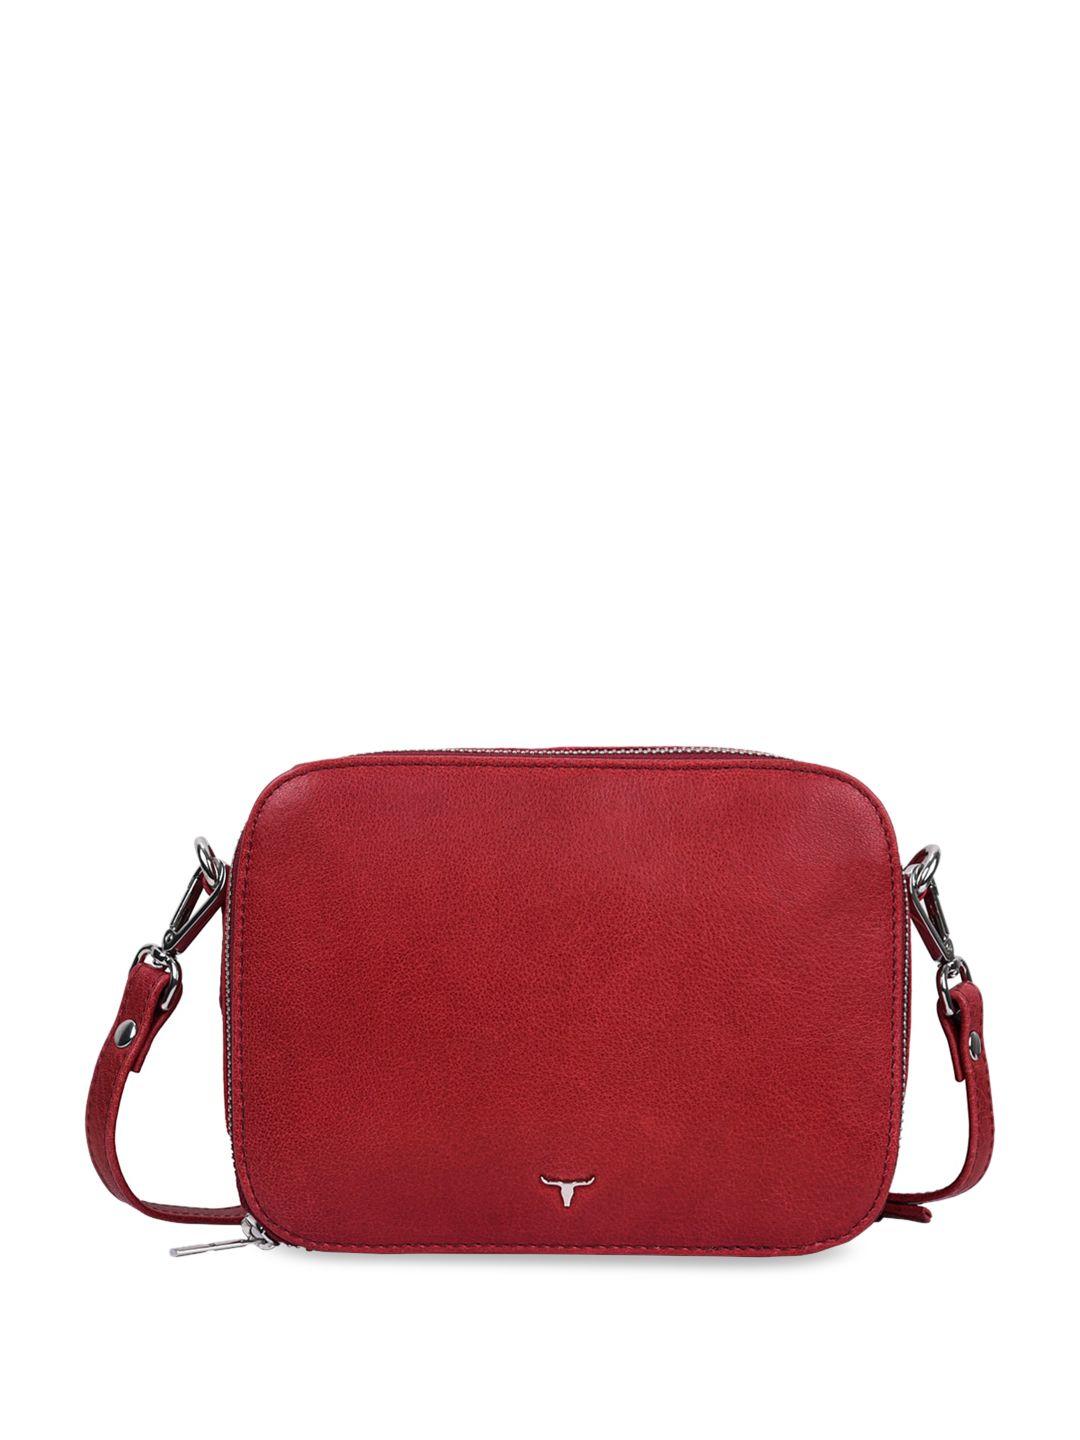 urban forest red leather sling bag